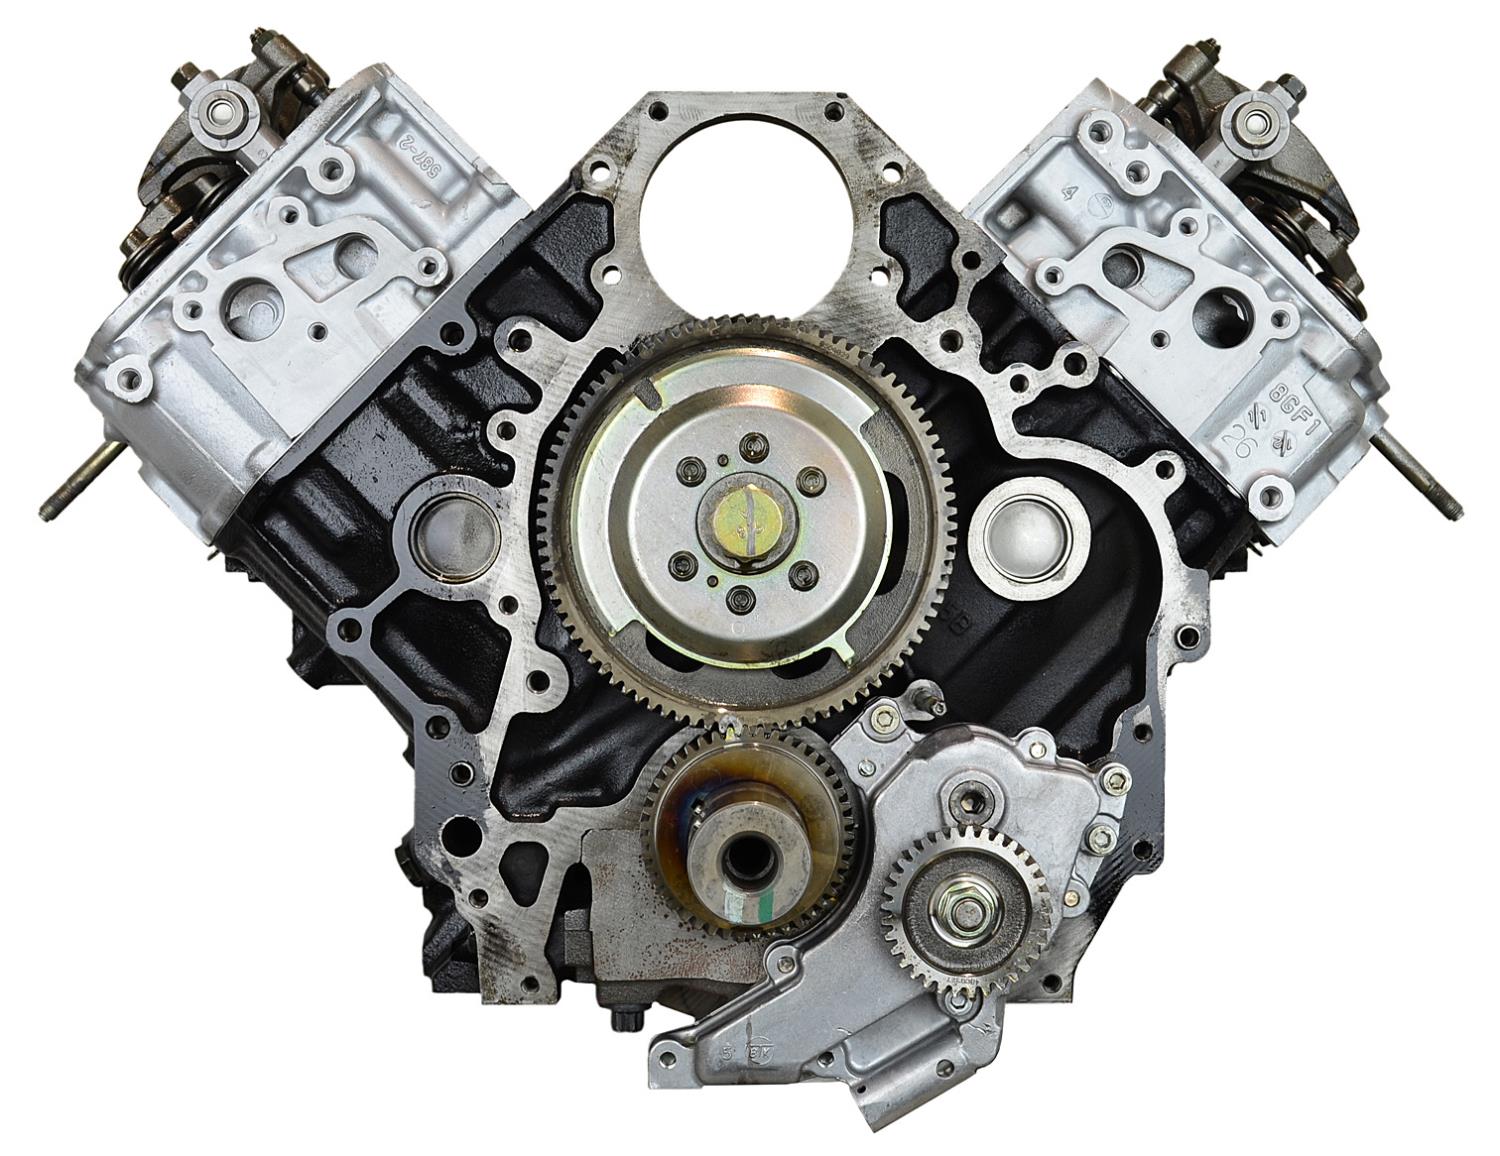 DCFM Remanufactured Crate Engine for 2001-2004 Chevy/GMC Light Duty Truck with 6.6L Duramax Turbo Diesel V8